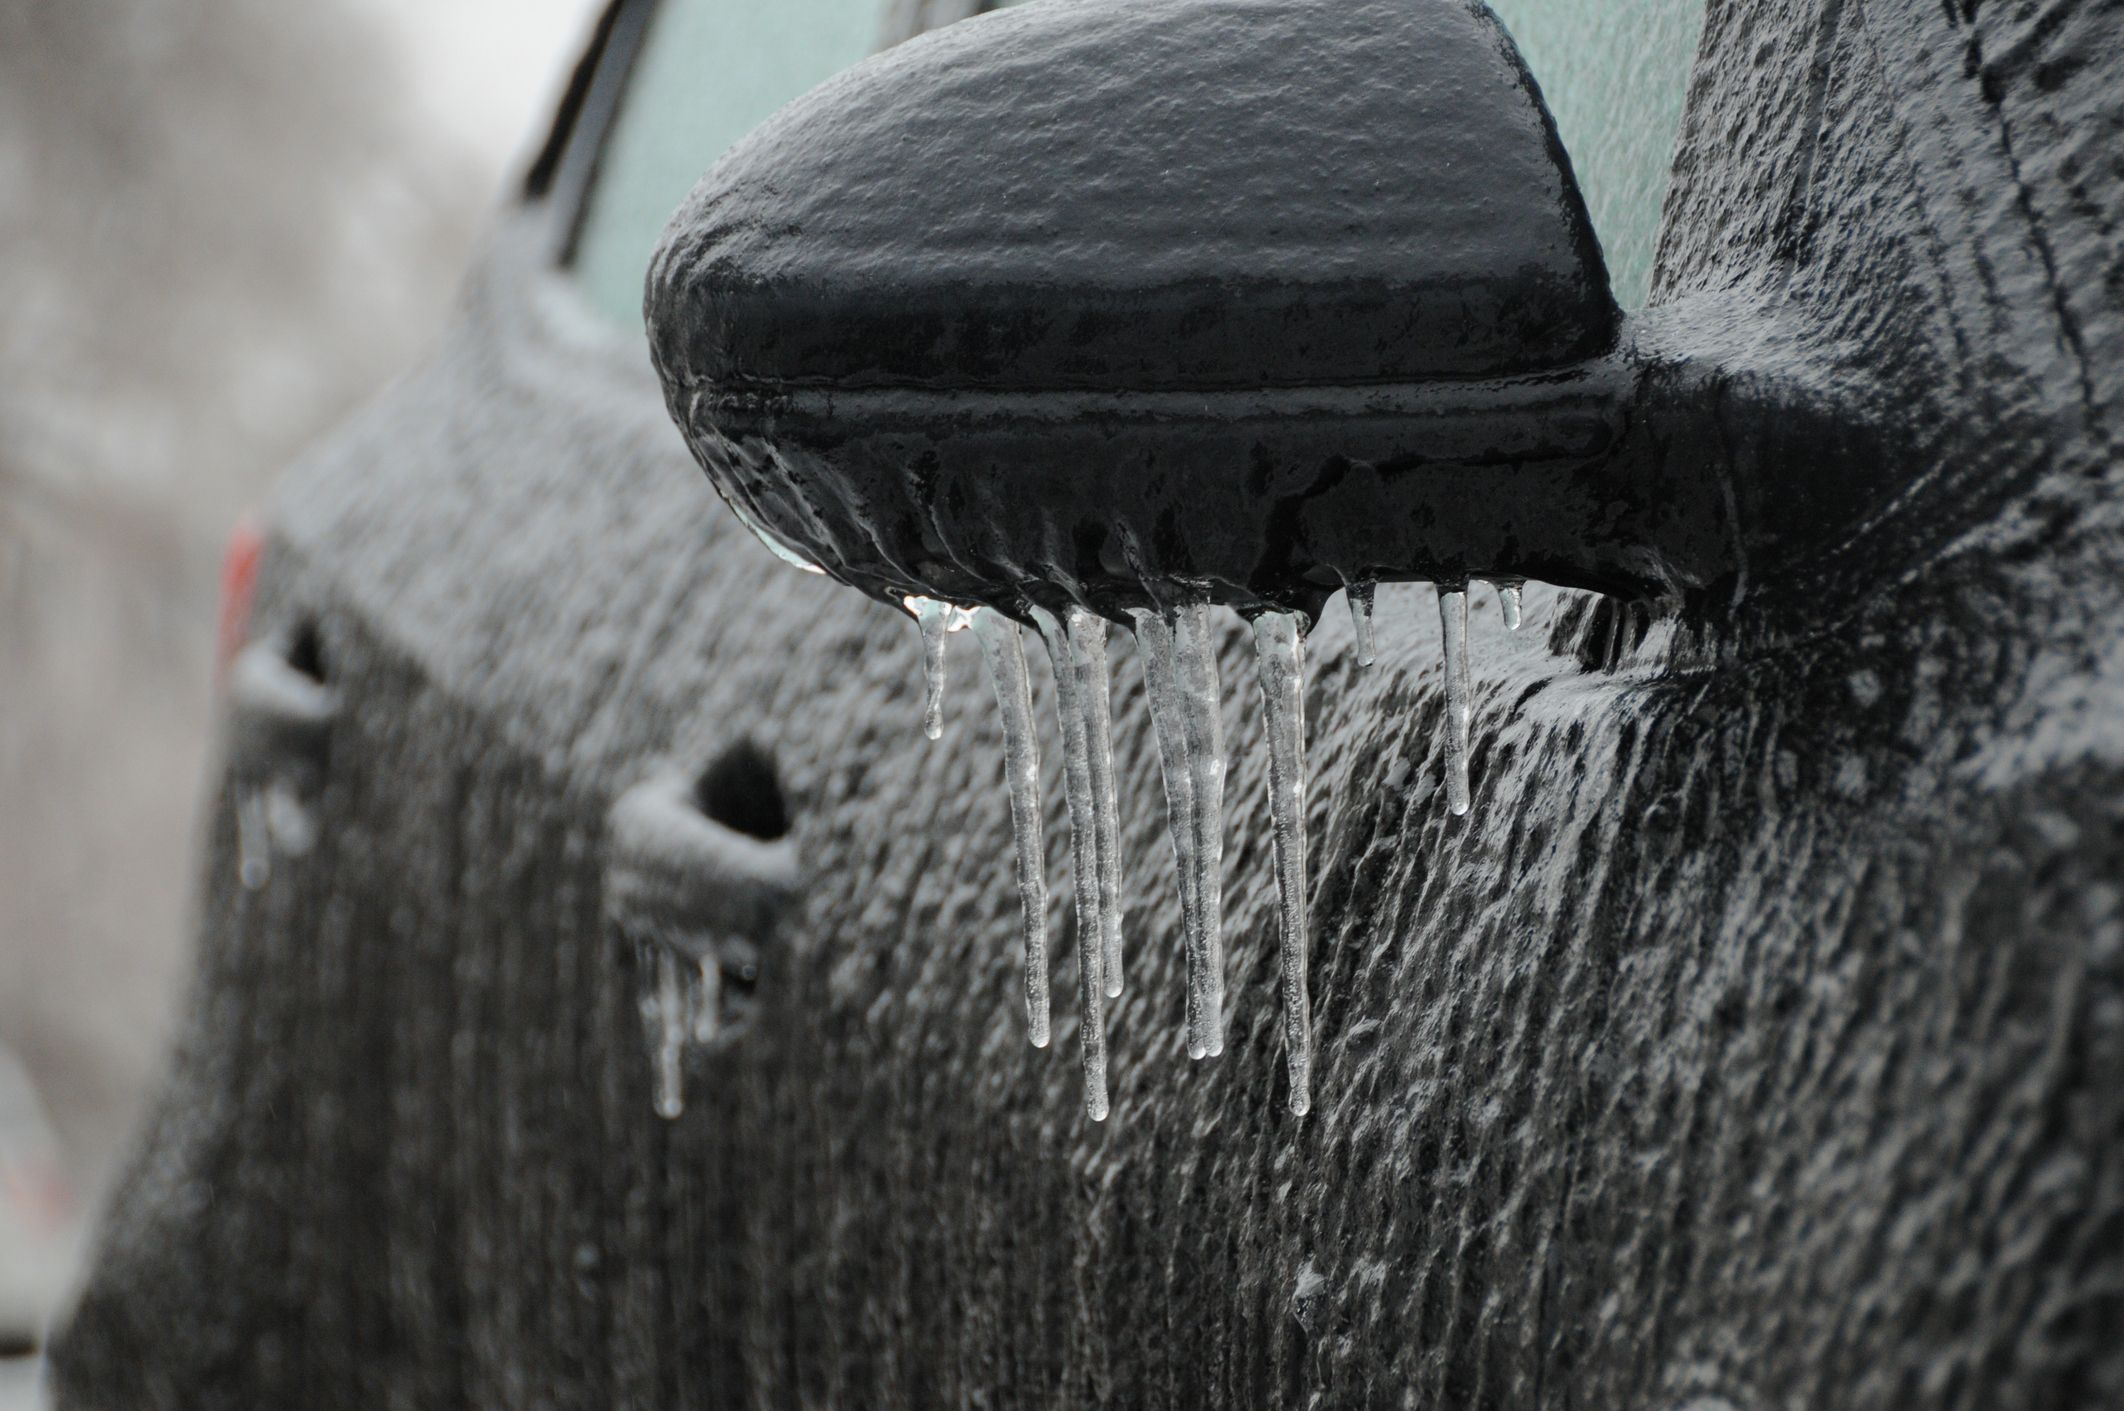 Do you spray washer fluid to avoid scraping your car's windows